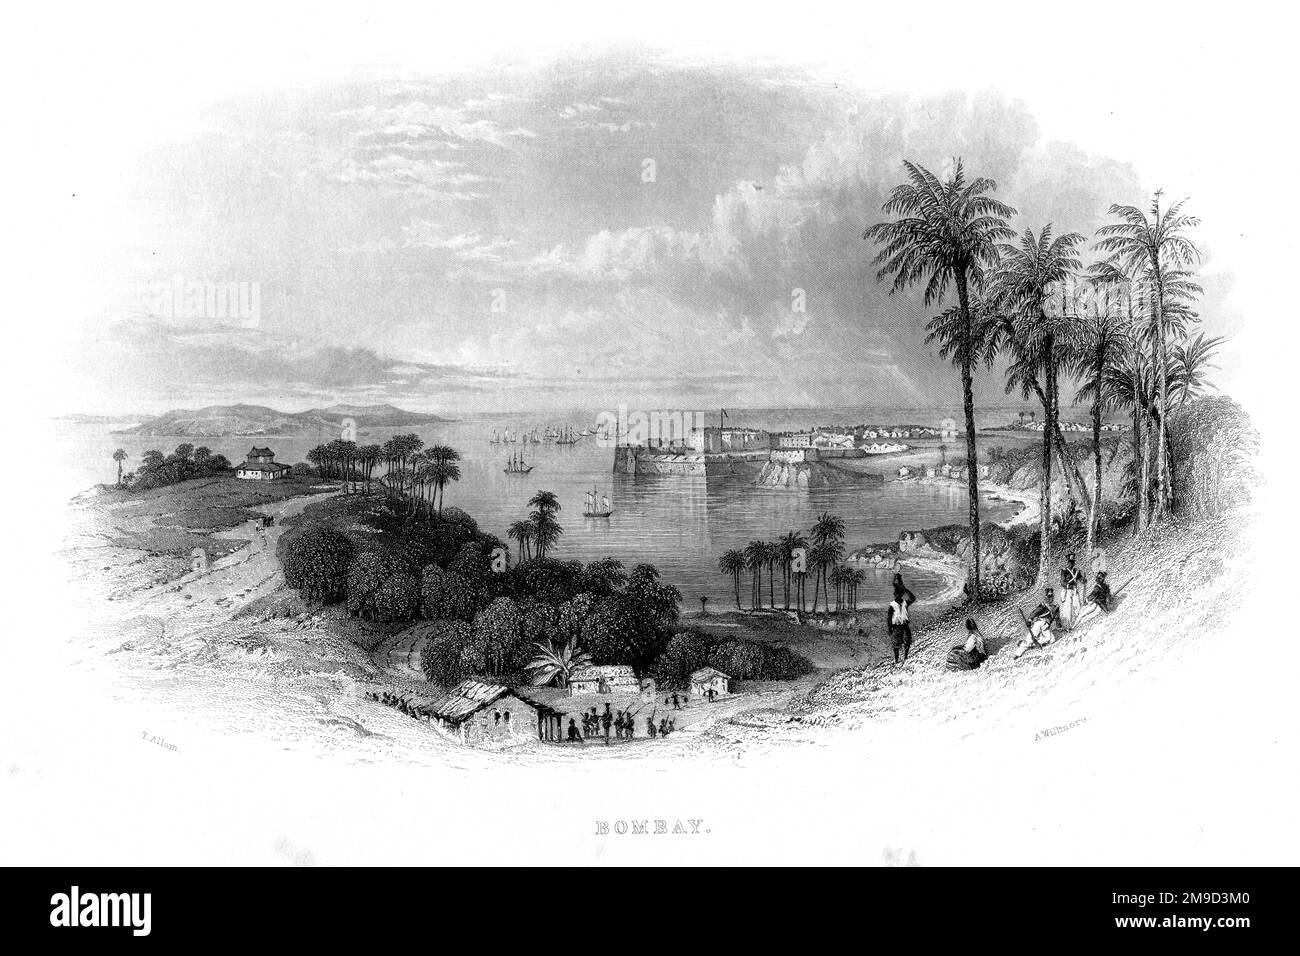 Bombay (Mumbai), mid-19th century. It formed part of the Portuguese Catherine of Braganza's dowry when she married Charles II in 1661. Today, it is India's main port and commercial centre. Stock Photo